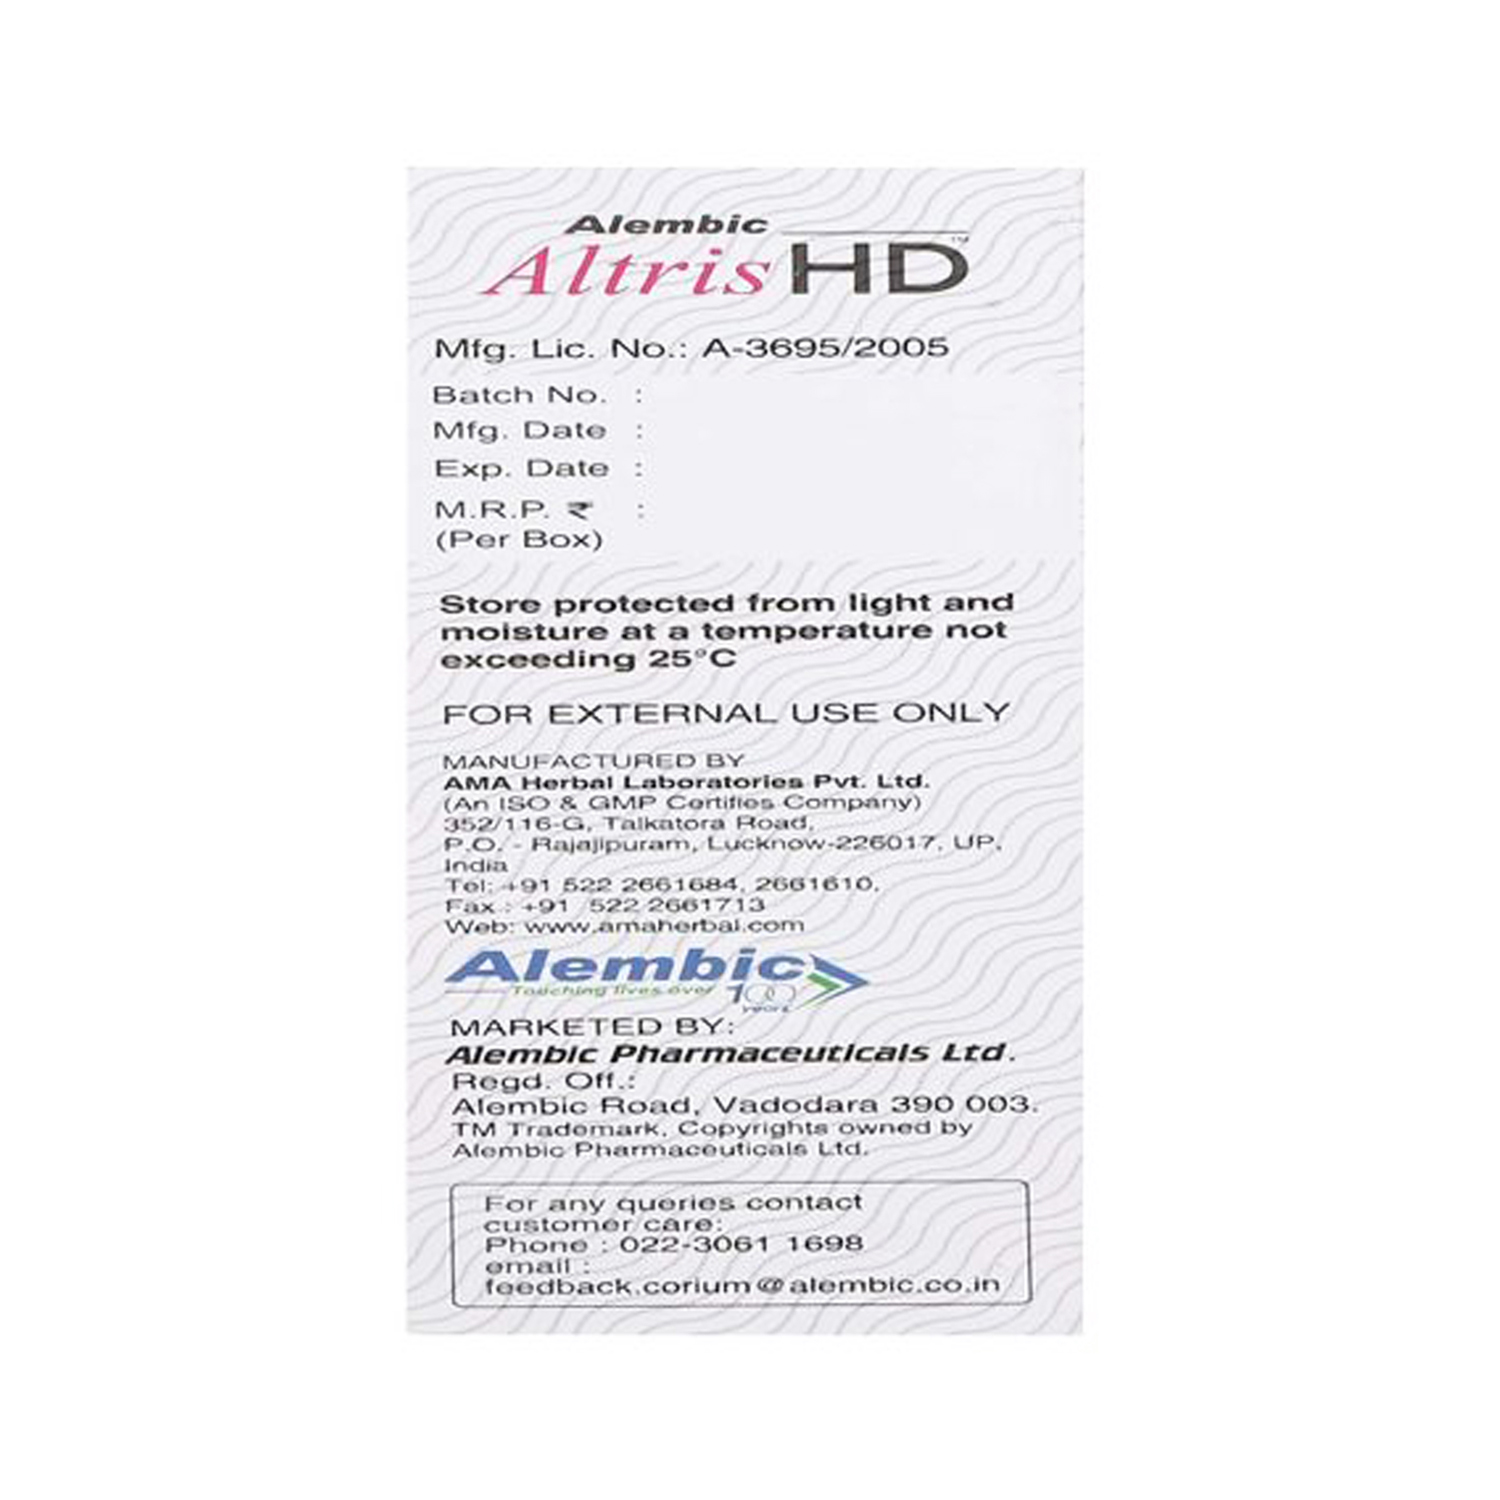 Can I Use Altris Hd Hair Color For White  Can I Use Altris Hd  Practo  Consult